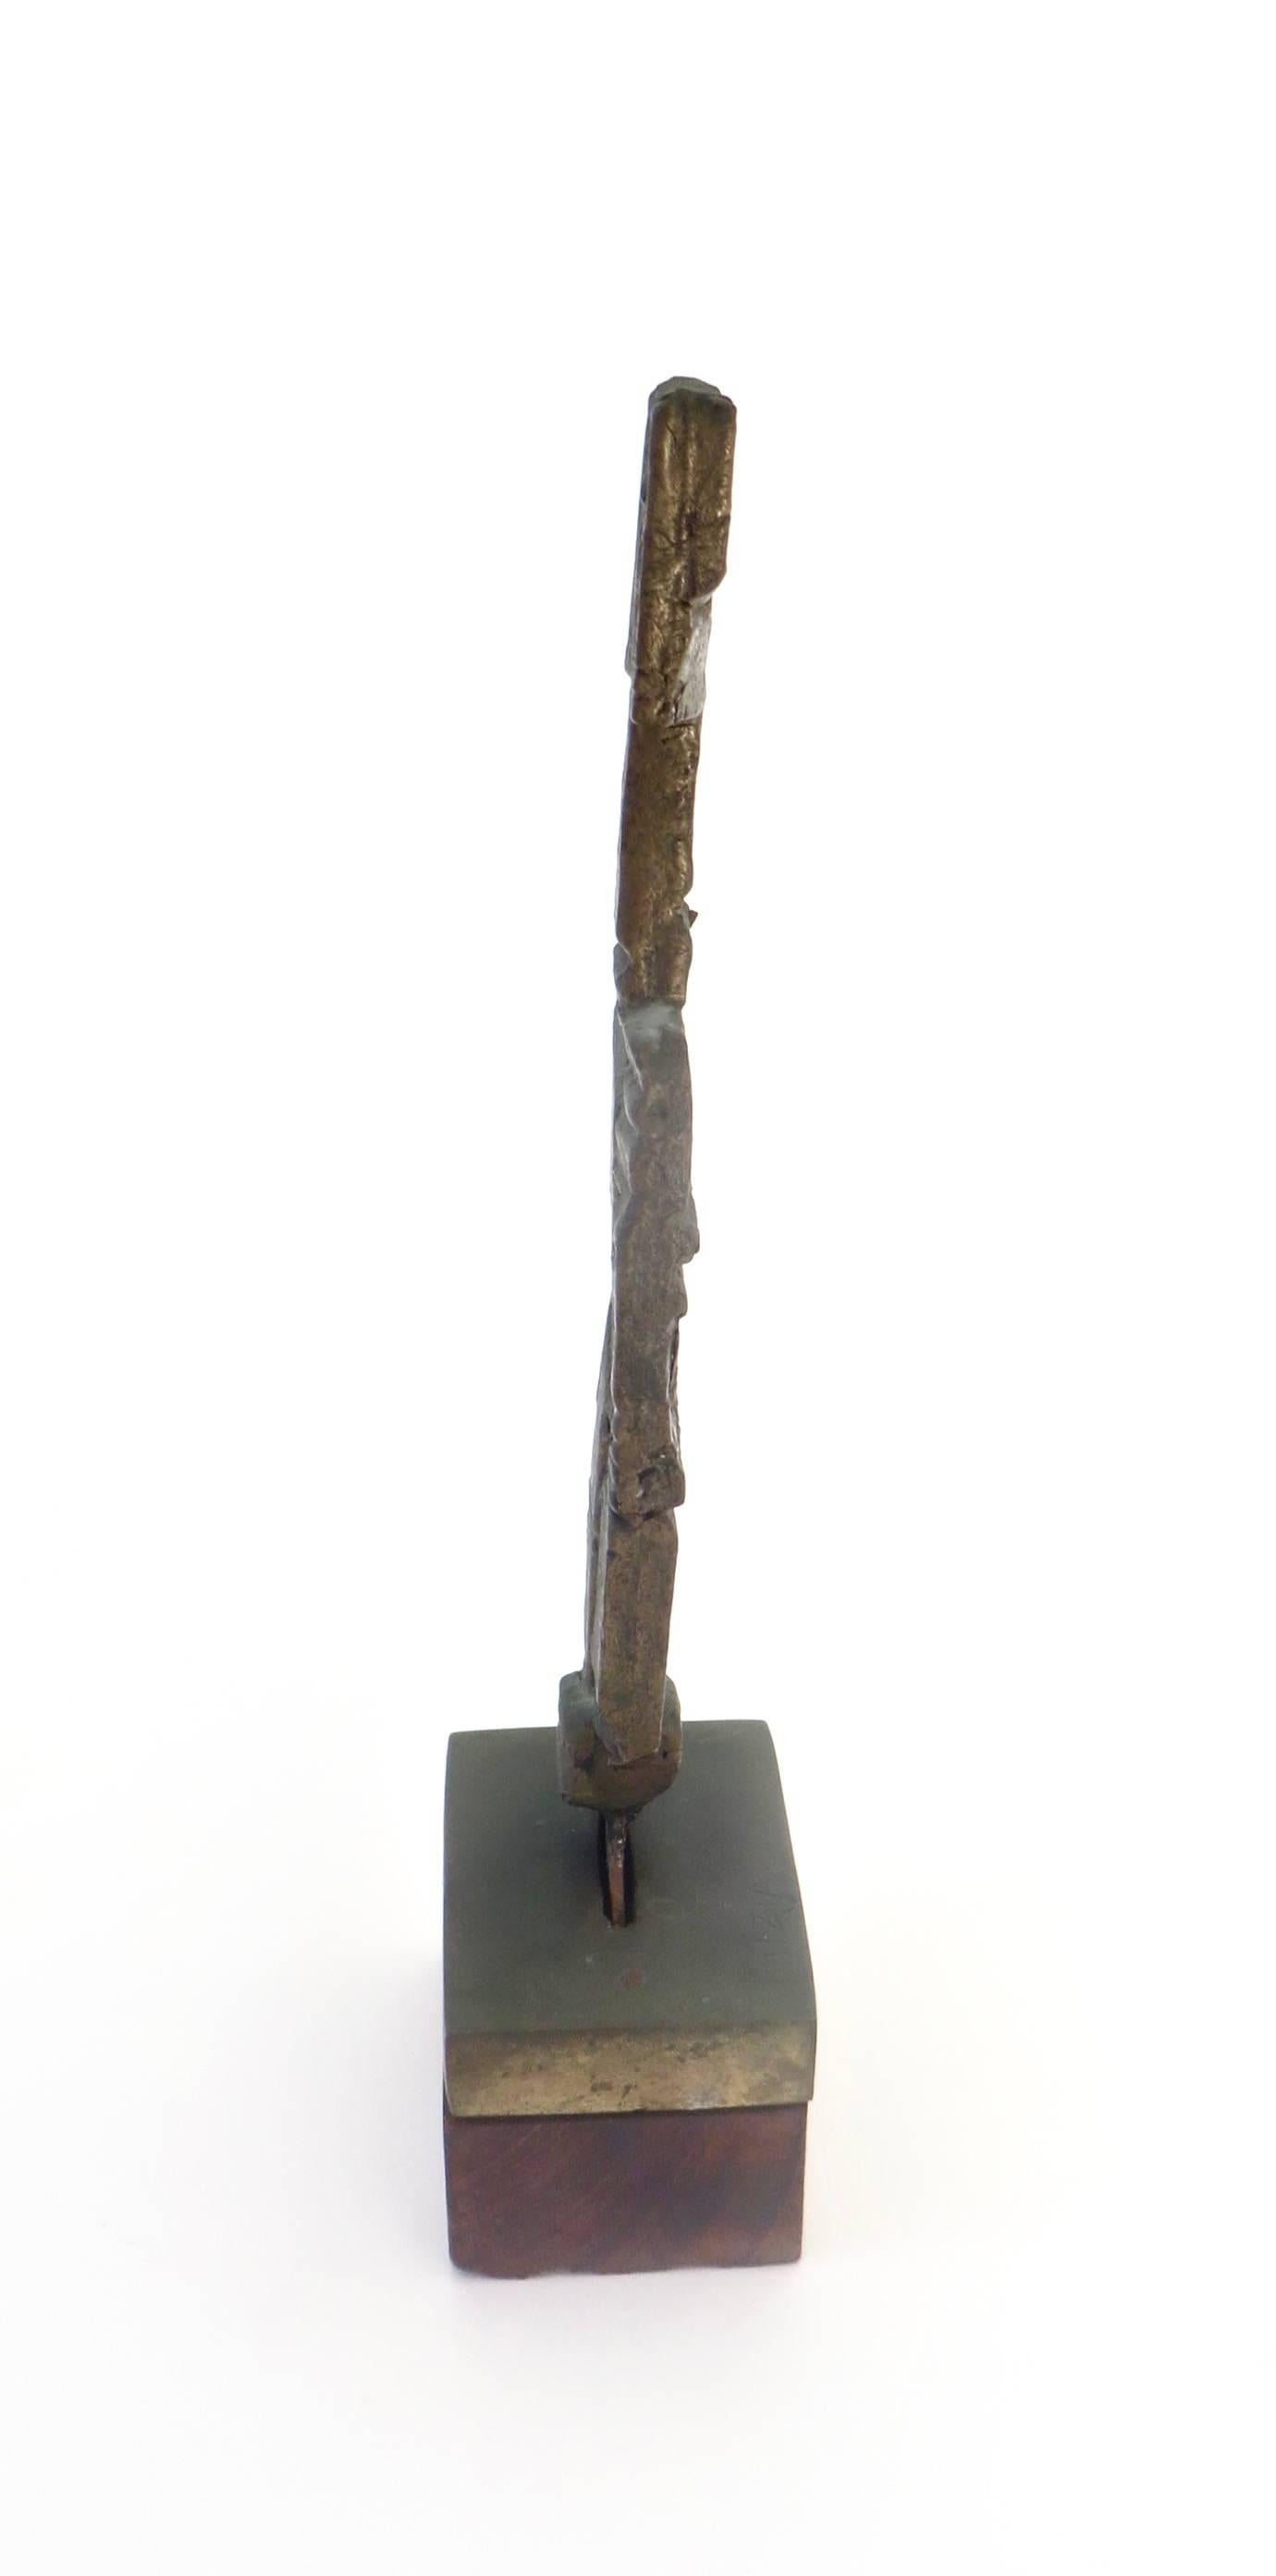 A cast bronze, abstract sculpture by the artist known as Fitzia. 
Fitzia Mendialdua Chopin was born in France in 1931 and relocated to Mexico in 1951. Fitzia is mostly known for her abstract paintings and collages. 
This small bronze TOTEM like